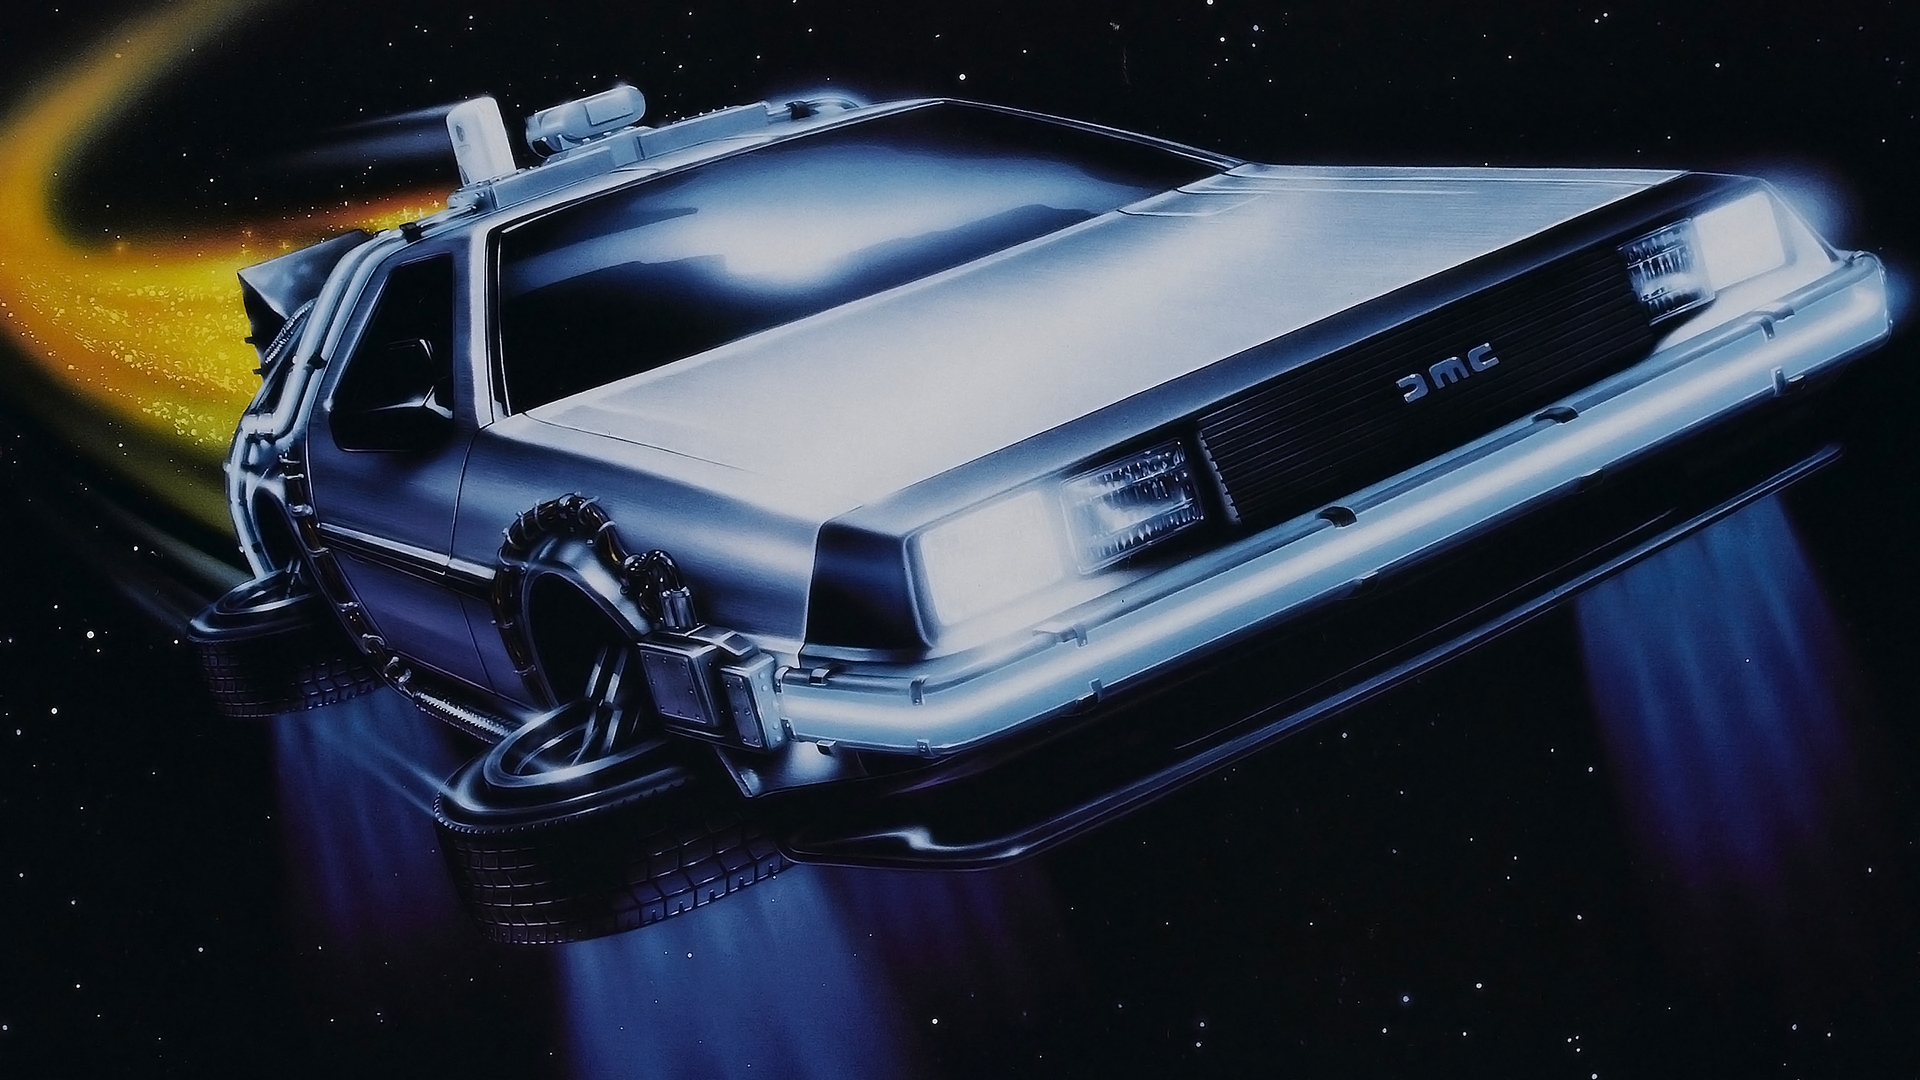 61 Back To The Future HD Wallpapers | Backgrounds - Wallpaper Abyss